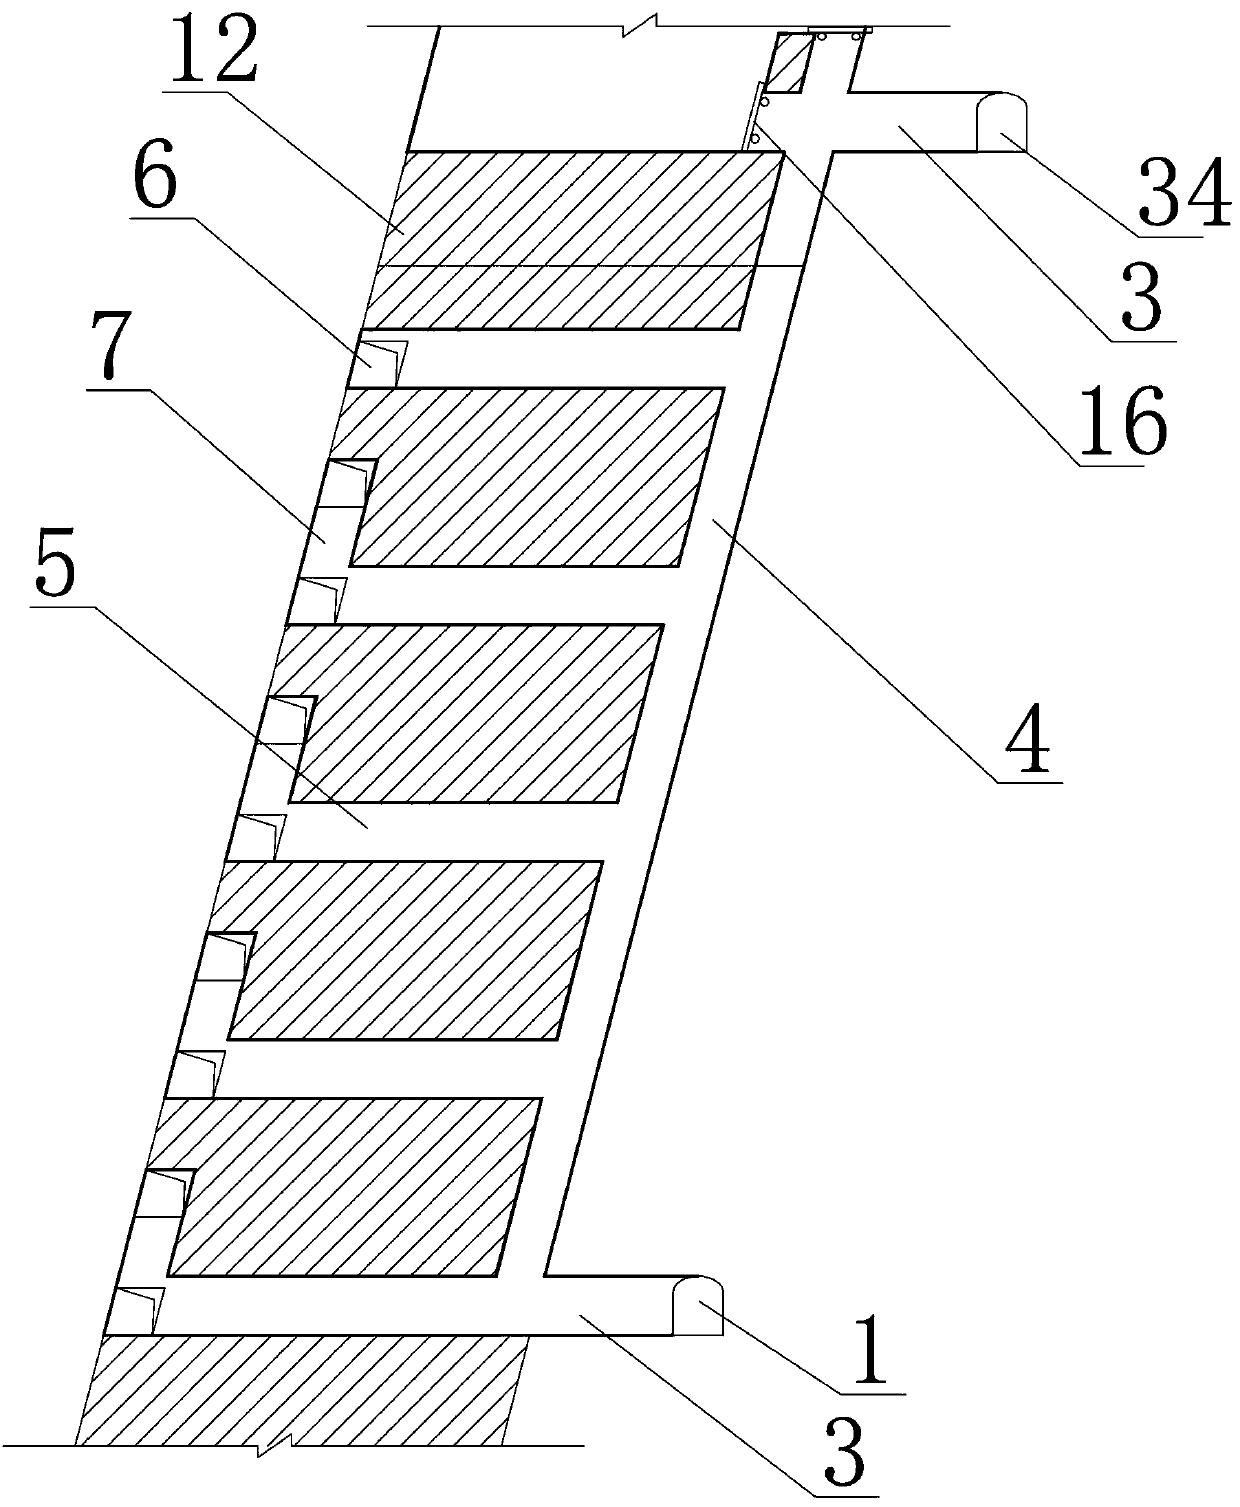 A mining method for mining steeply inclined thick ore bodies with broken hanging wall rocks